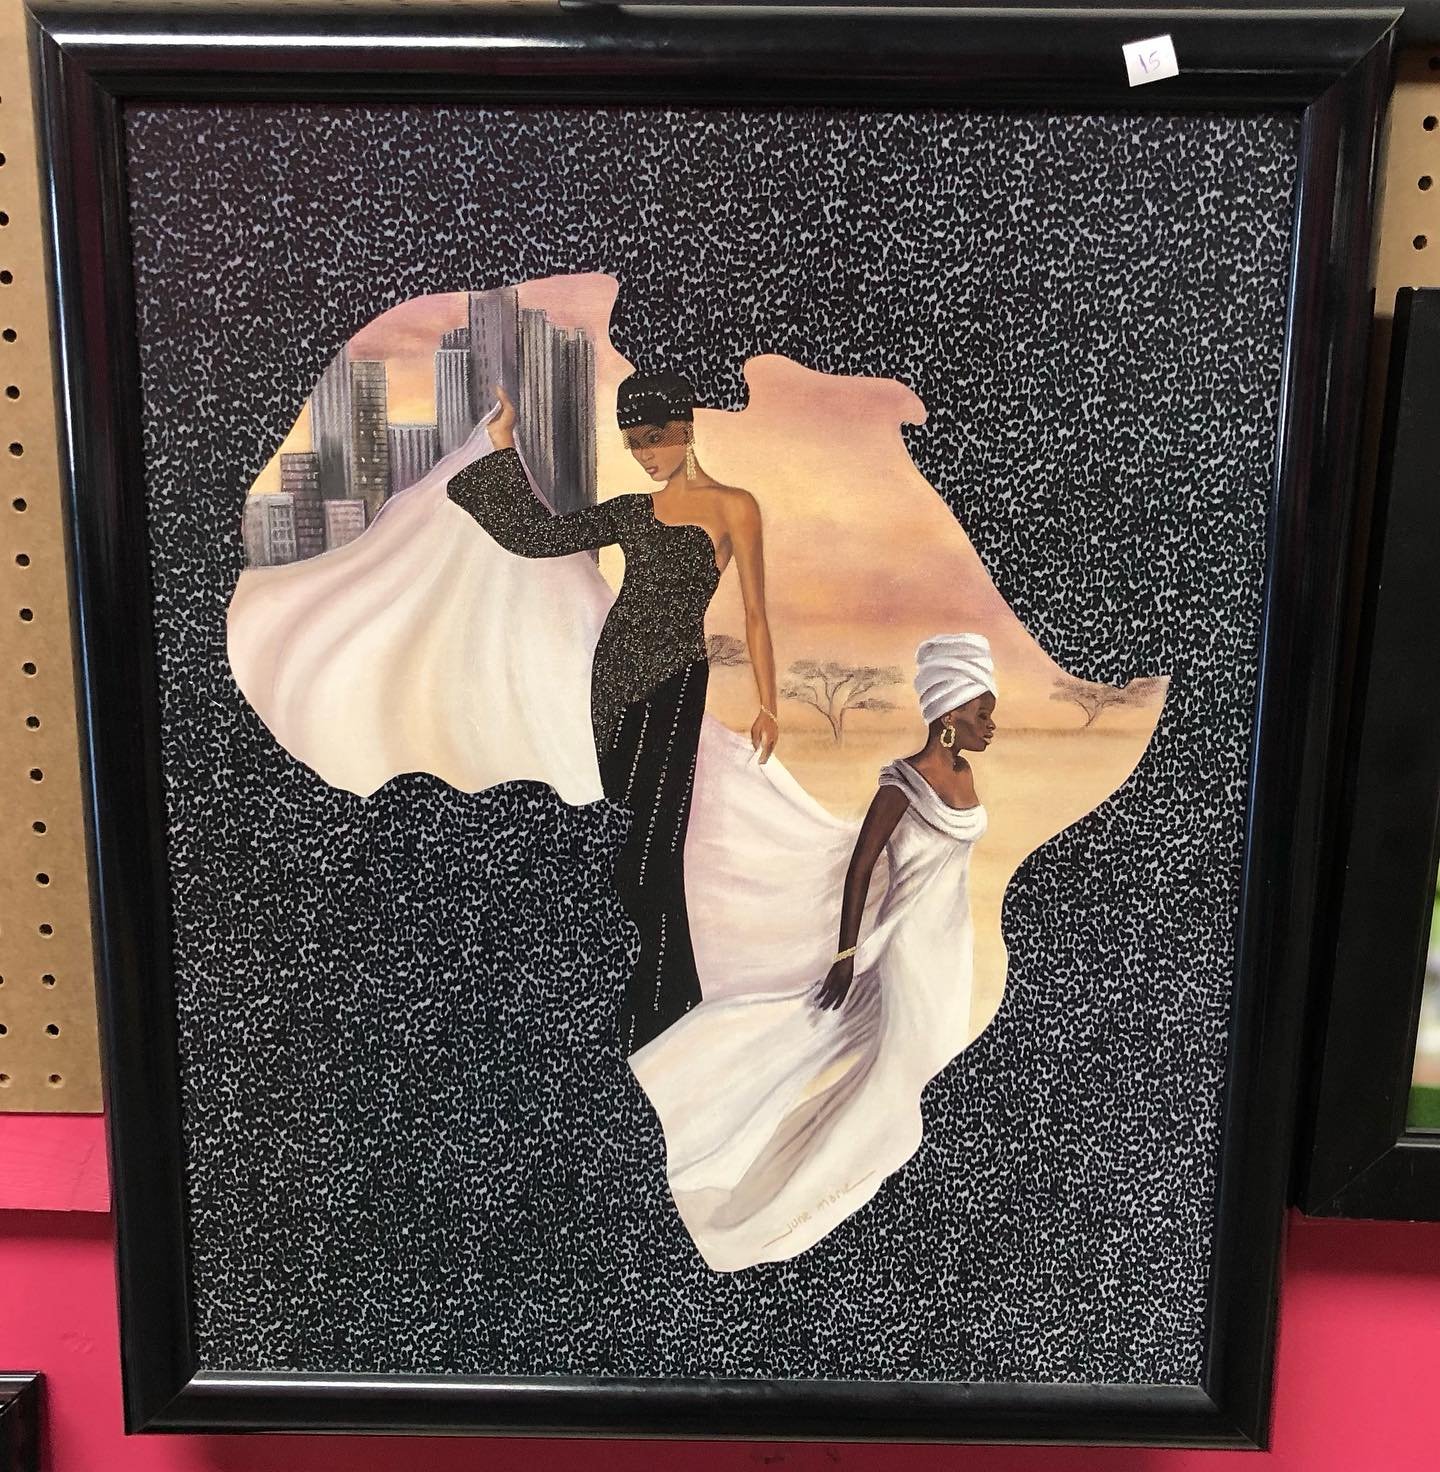 Diversity Thrift has a wide variety of art at great prices! Come see us. We&rsquo;re open 10am-6pm at 1407 Sherwood Ave. RVA 23220 (804) 353-8890. DiversityThrift.org
#art #thriftstorefinds #thriftstoreart